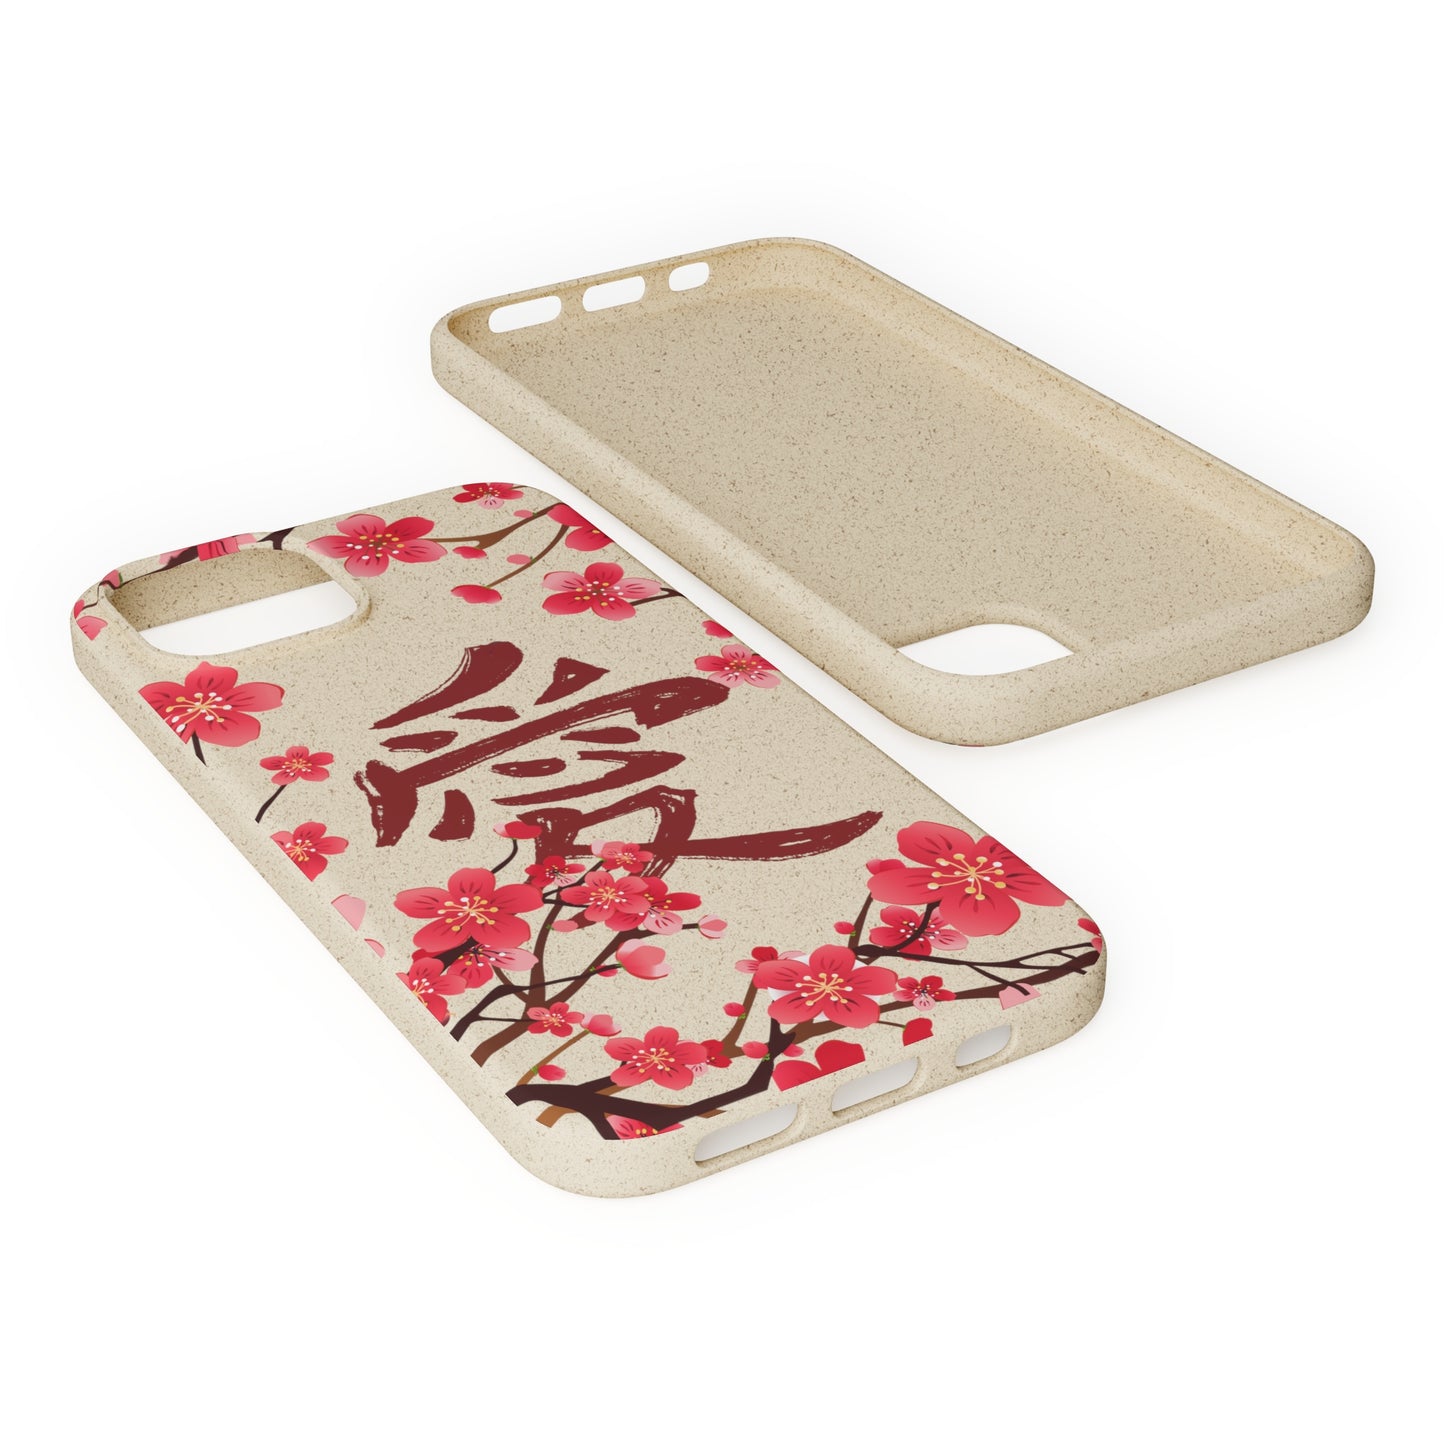 iPhone Biodegradable Case